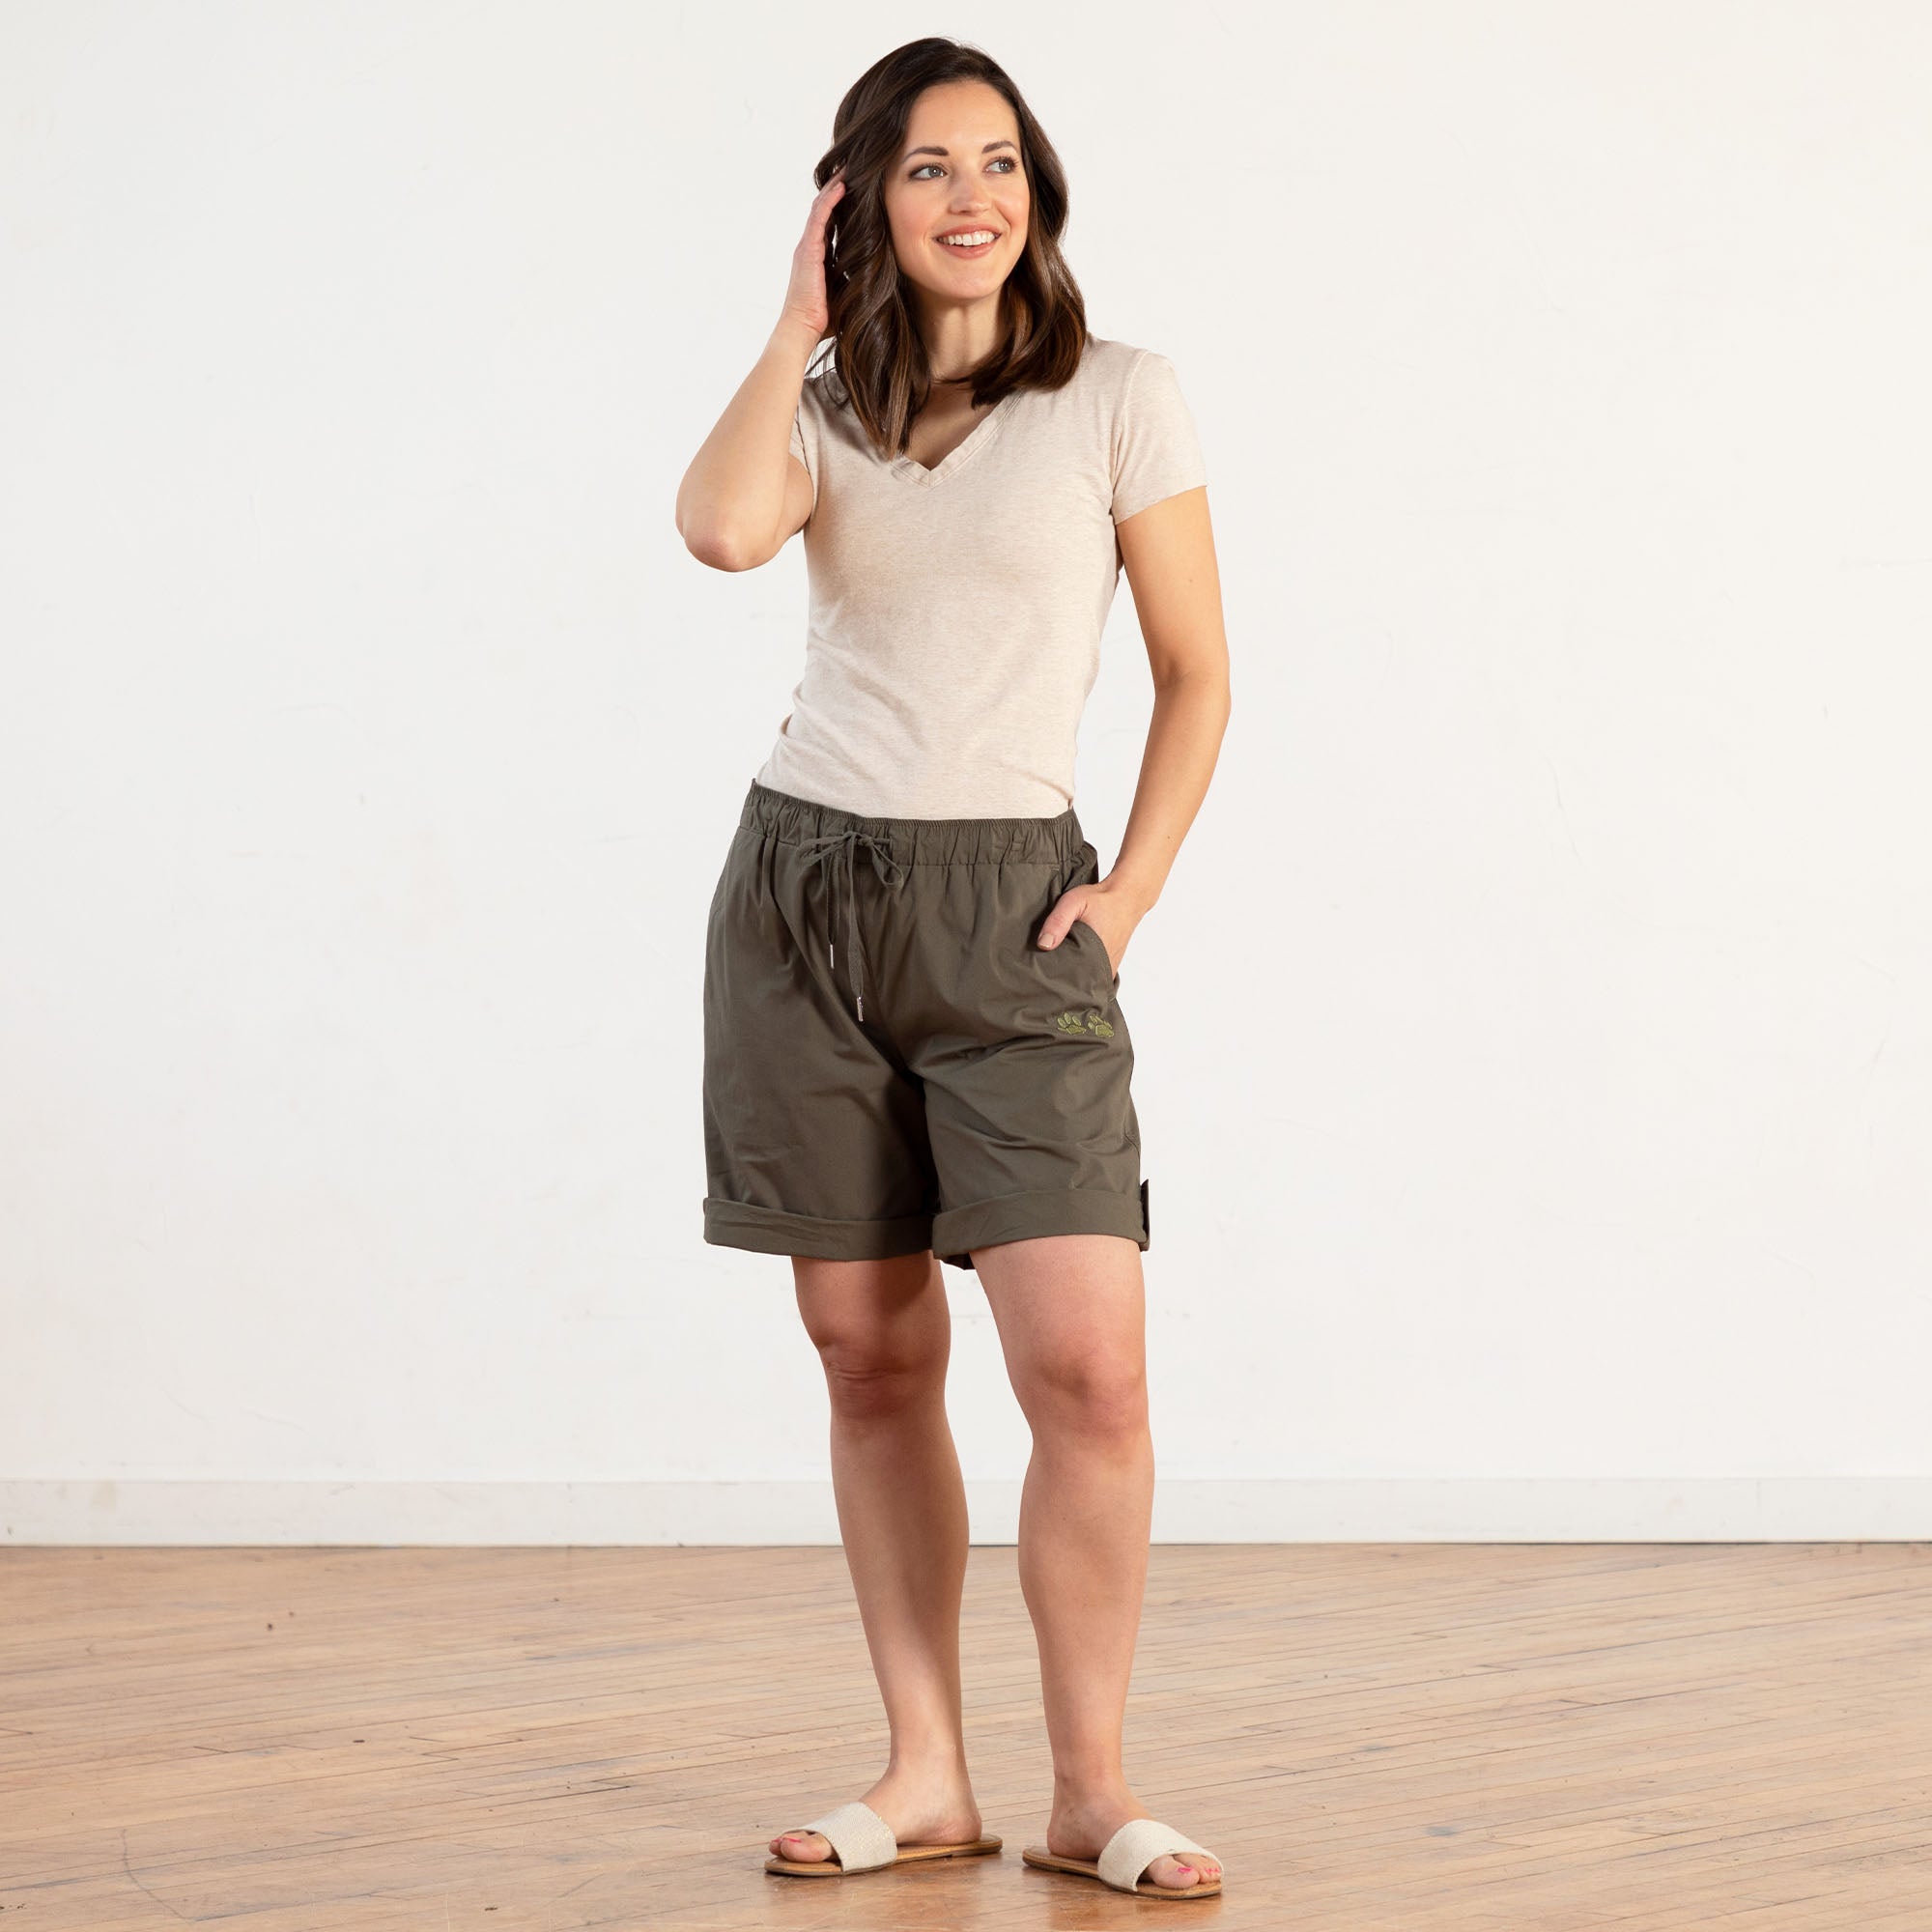 Paw Print Convertible Cuffed Shorts - Olive - 2X